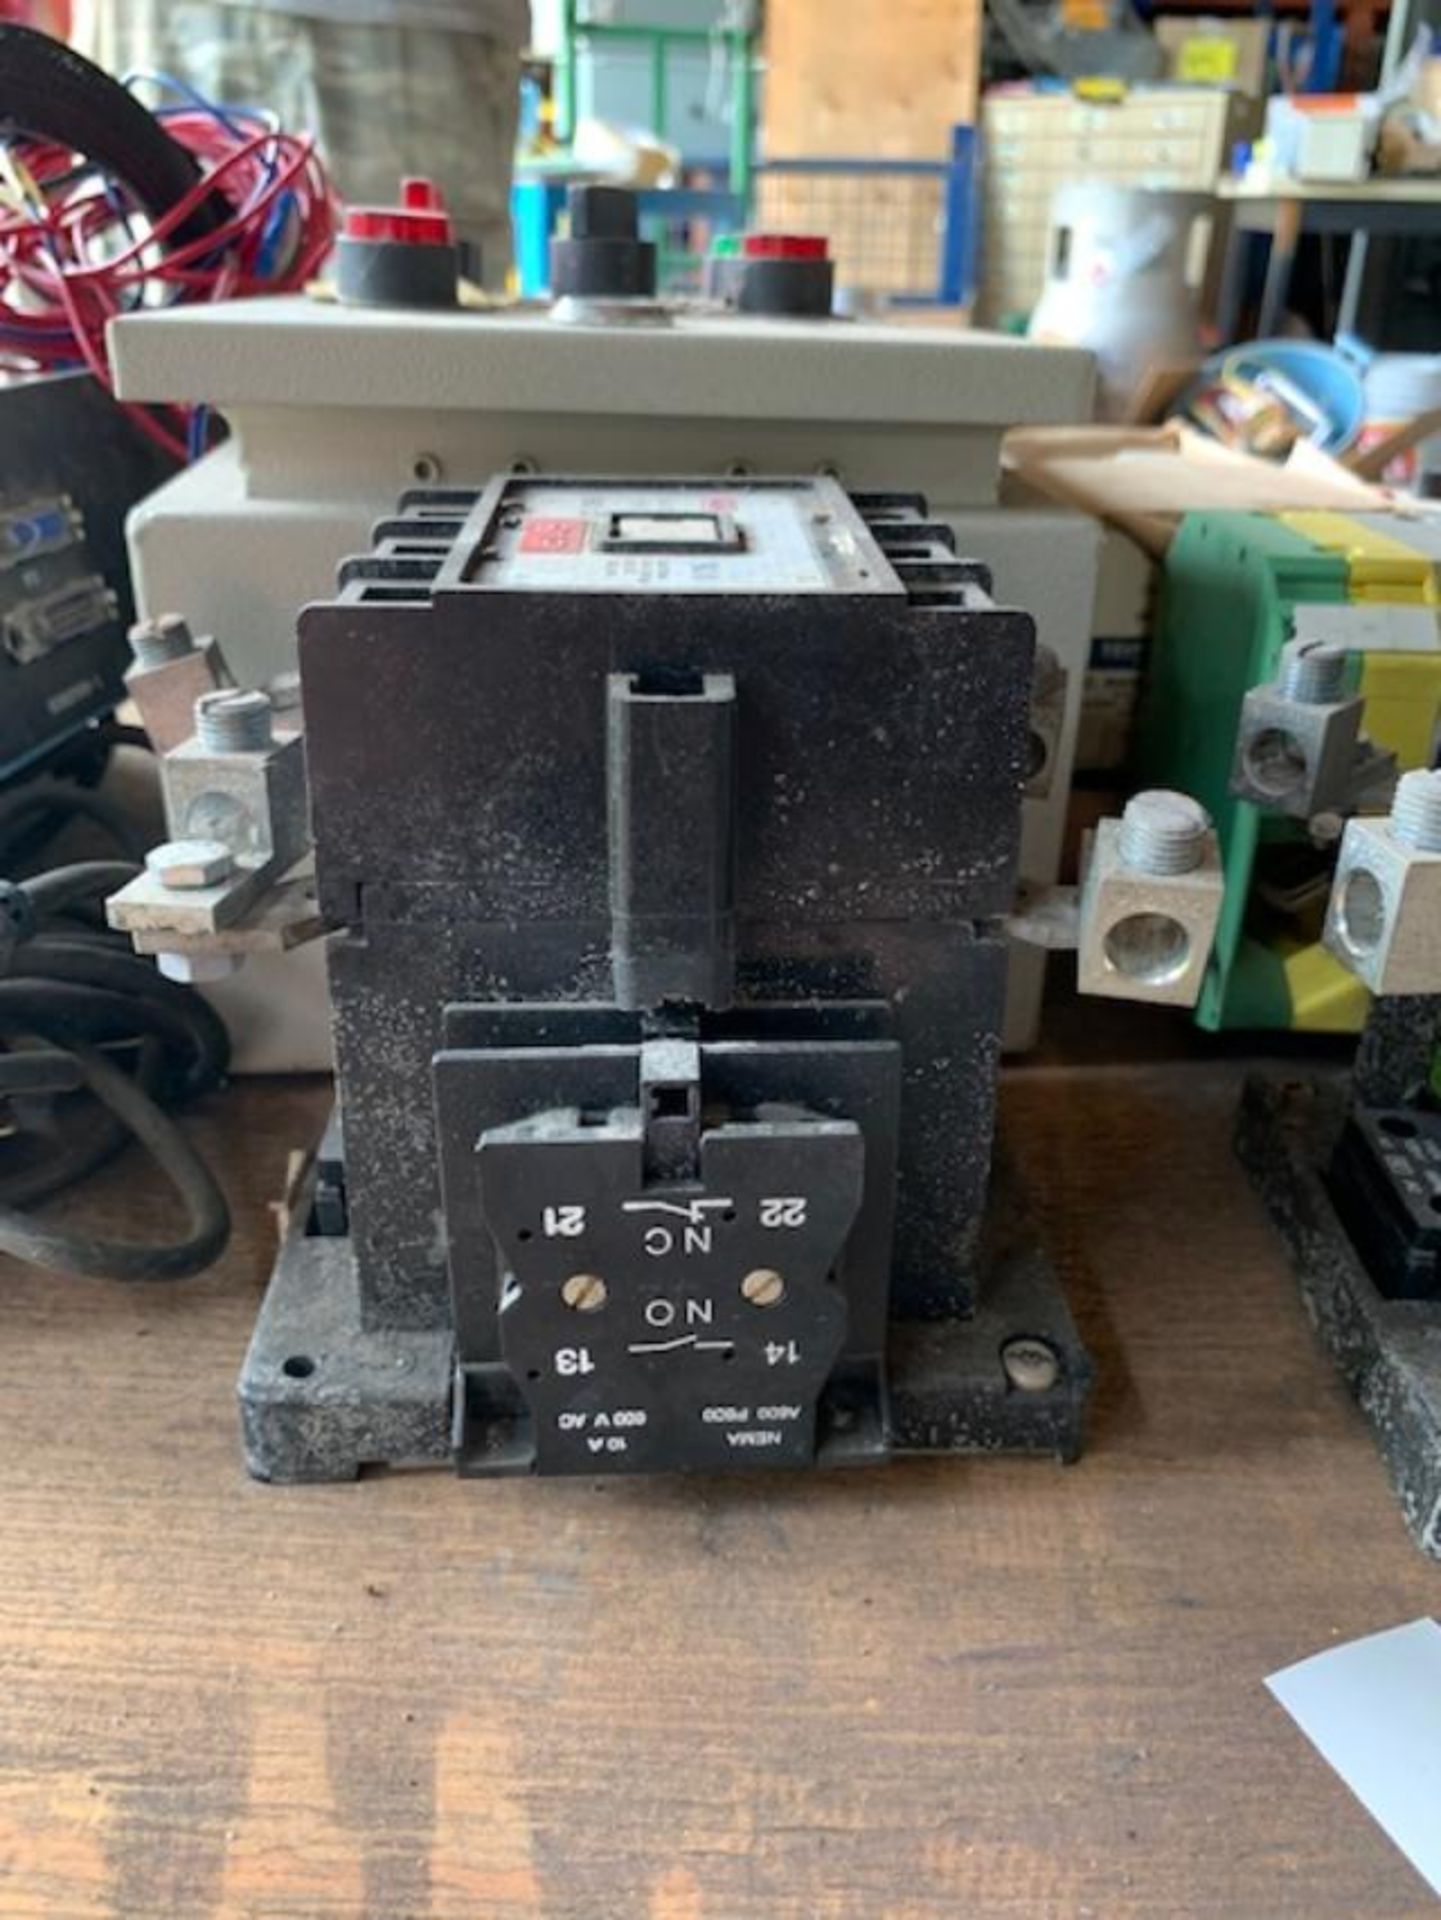 SQUARE D MECHANICAL STARTER, 380 AMP WIRE JOINTERS , SWITCH BOX WITH MULTIPLE SWITCHES, ABB 600 VOLT